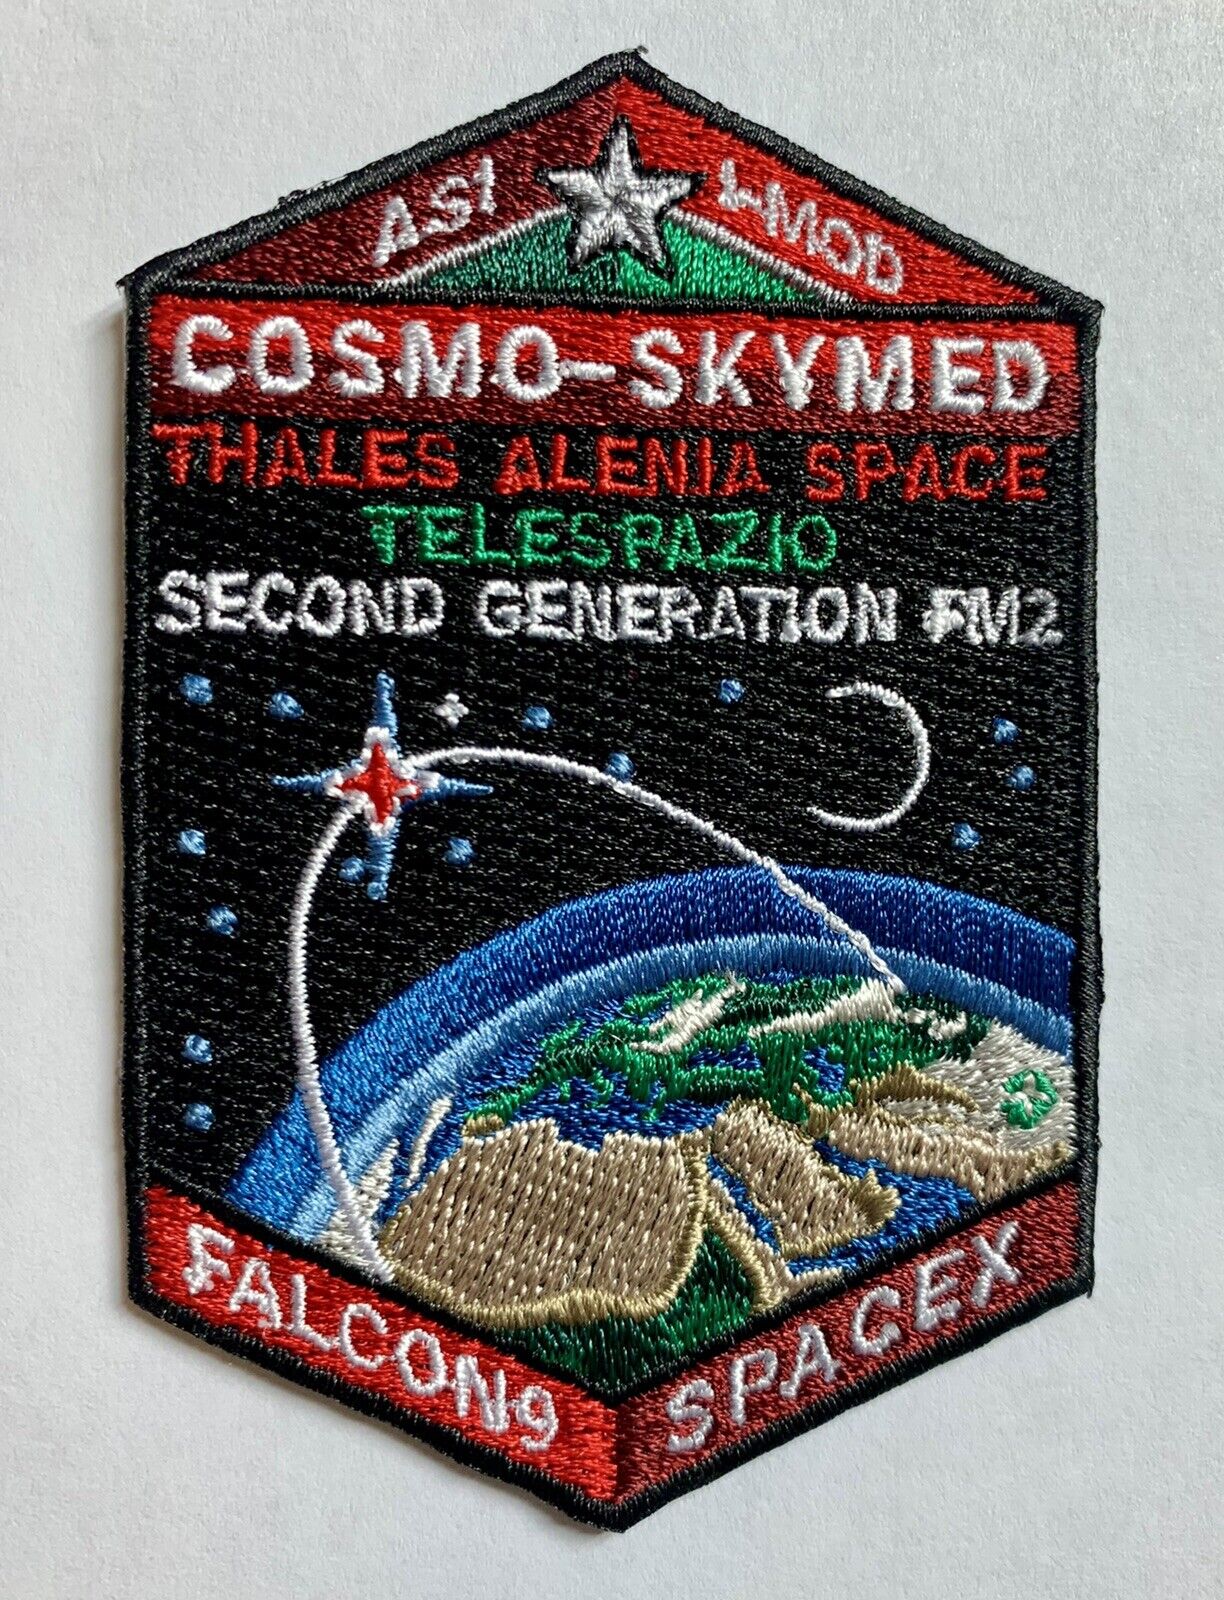 ORIGINAL SPACEX CSG-2 COSMO SKY MED FALCON 9 MISSION PATCH 3” Italy Satellite